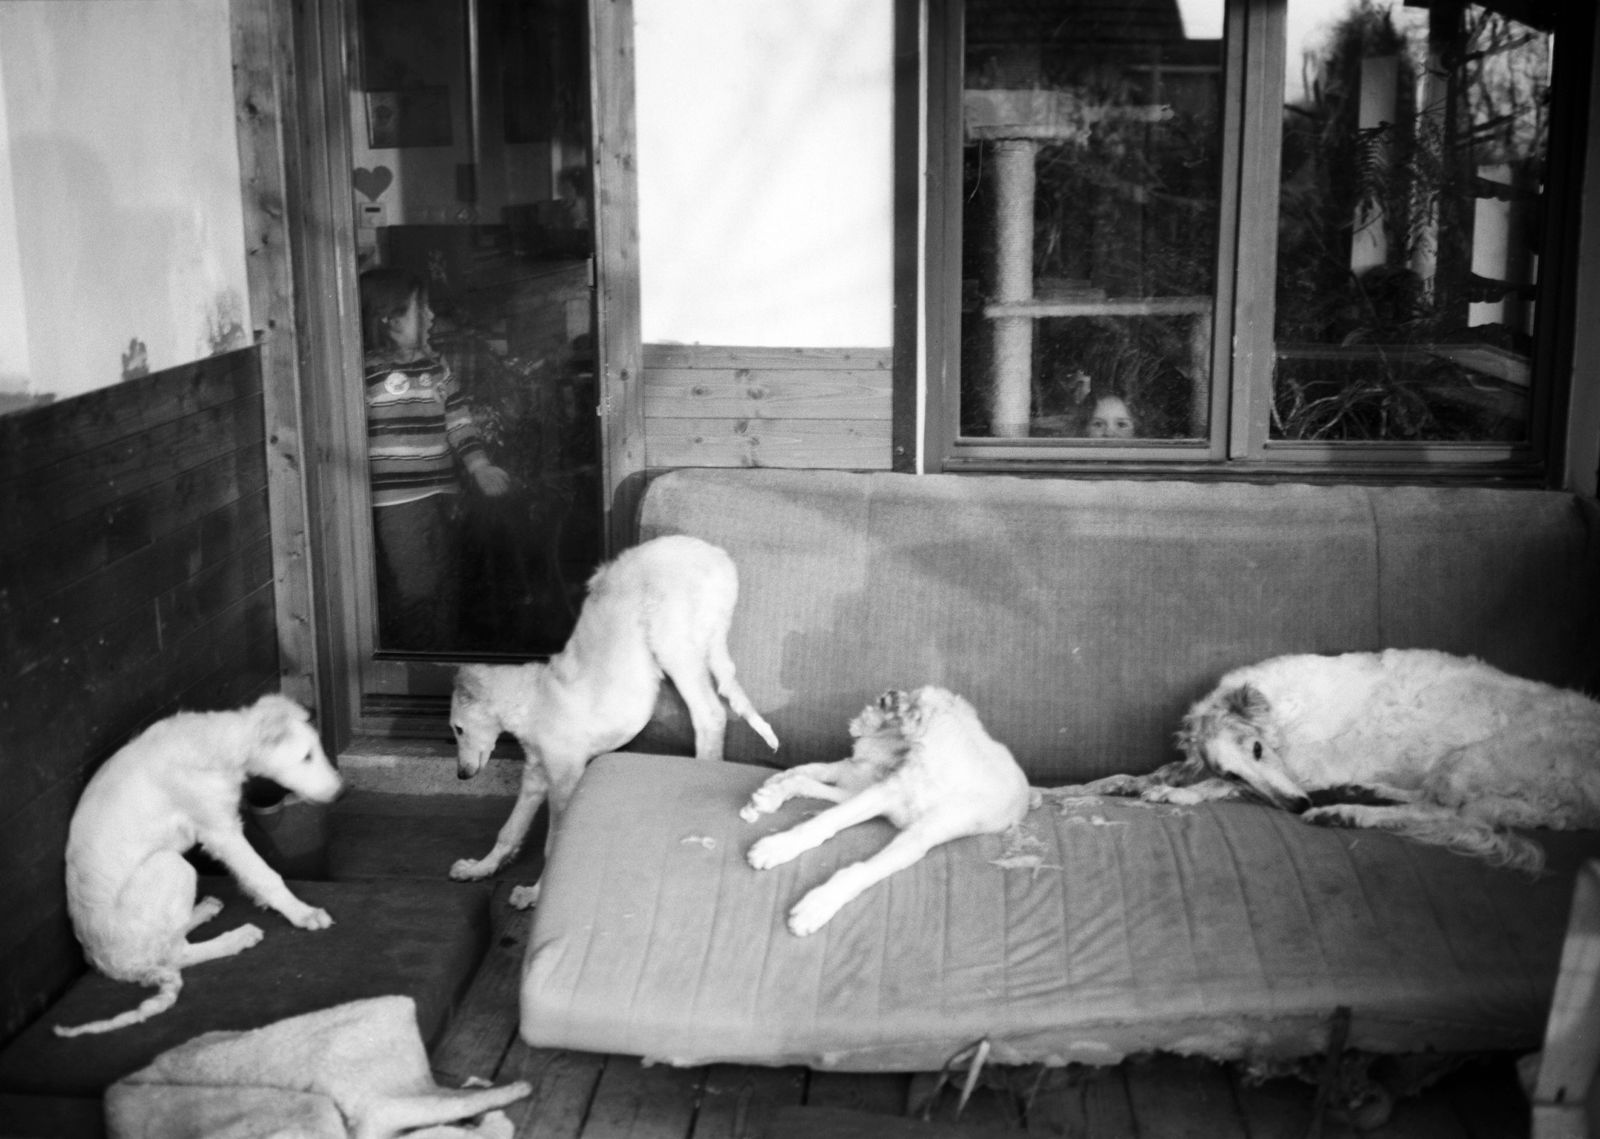 © Adam Kencki - Image from the house at hundred cats photography project